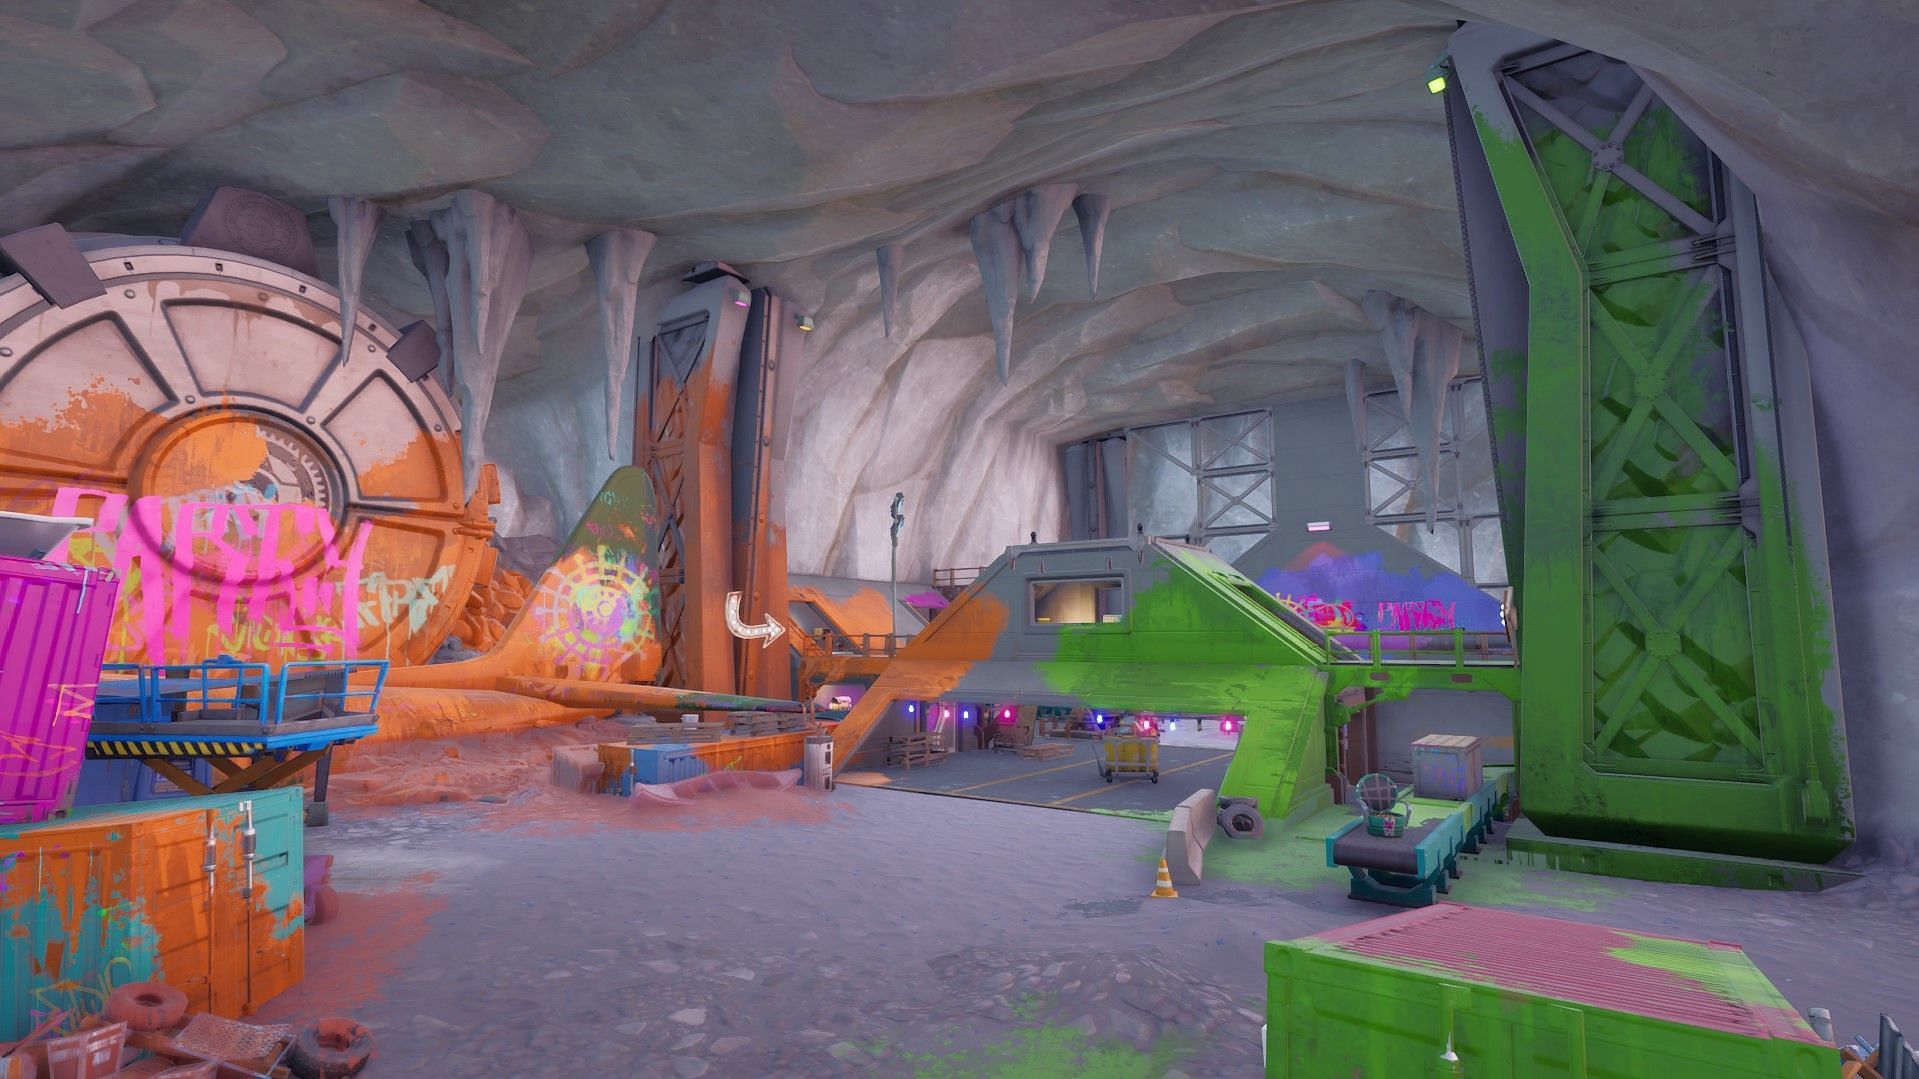 Eerie sounds emanating from the vault inside Rave Cave suggest something is brewing (Image via Epic Games)